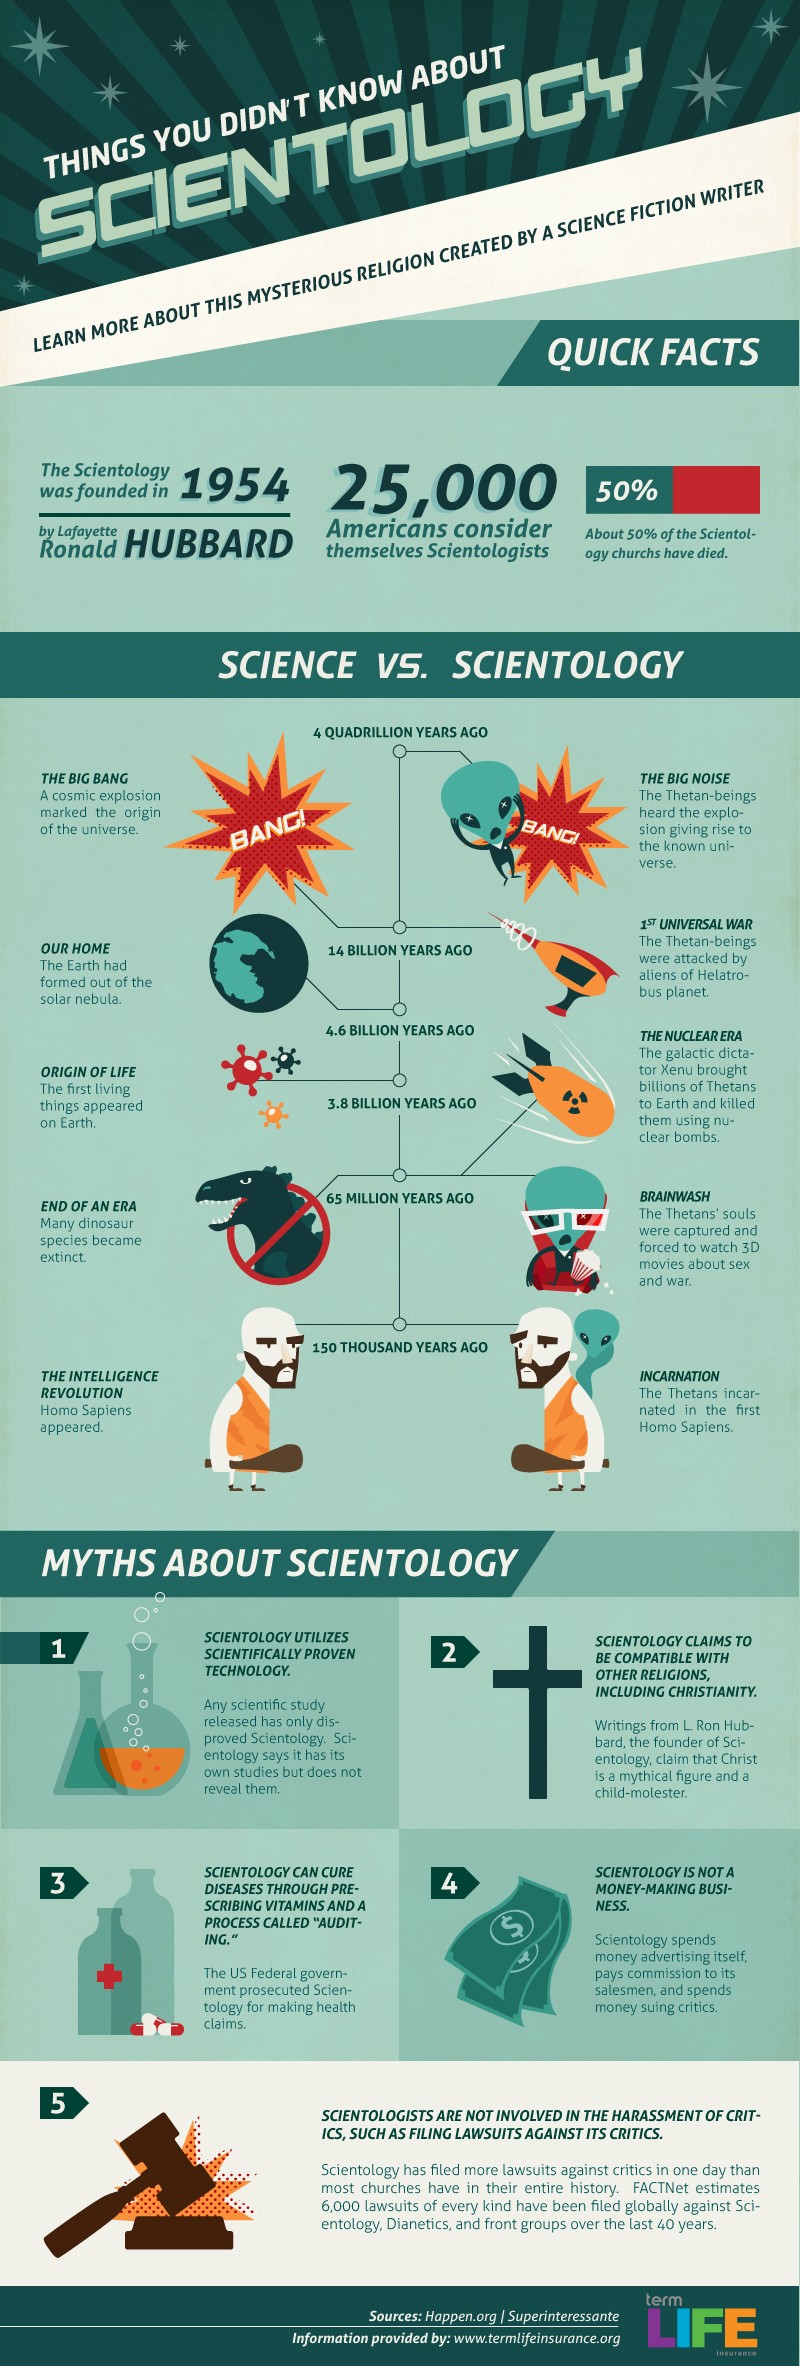 Things You Didn't Know About Scientology [Infographic]